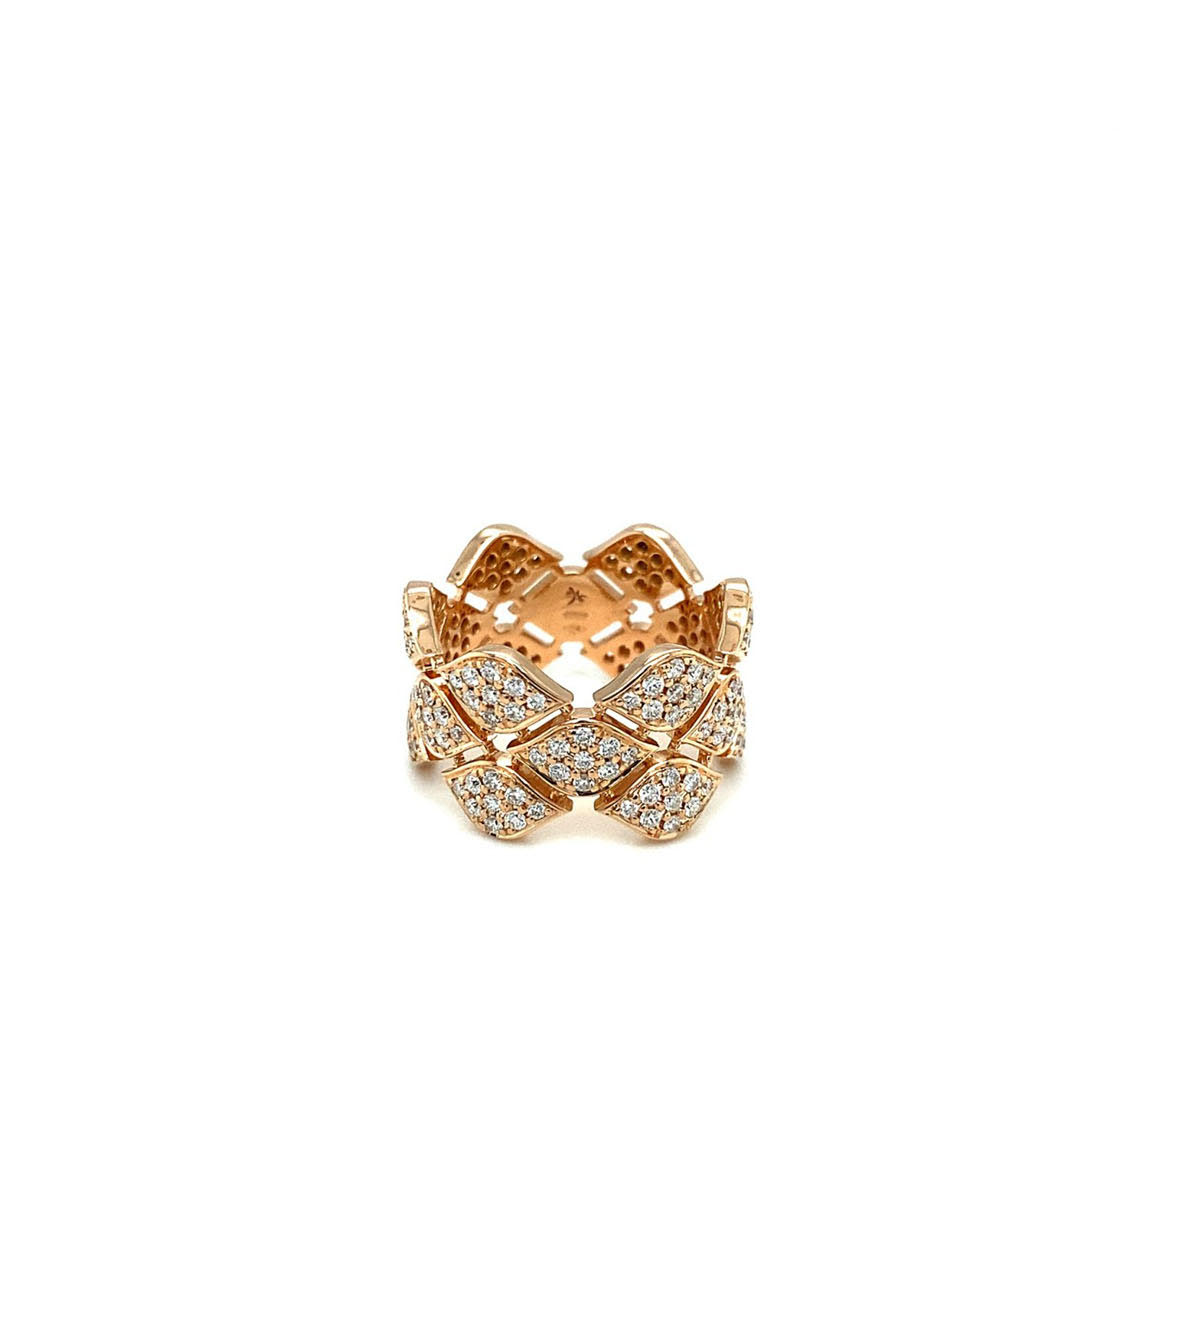 Ping Gold Ring with Diamonds MX1550BT by Casato 